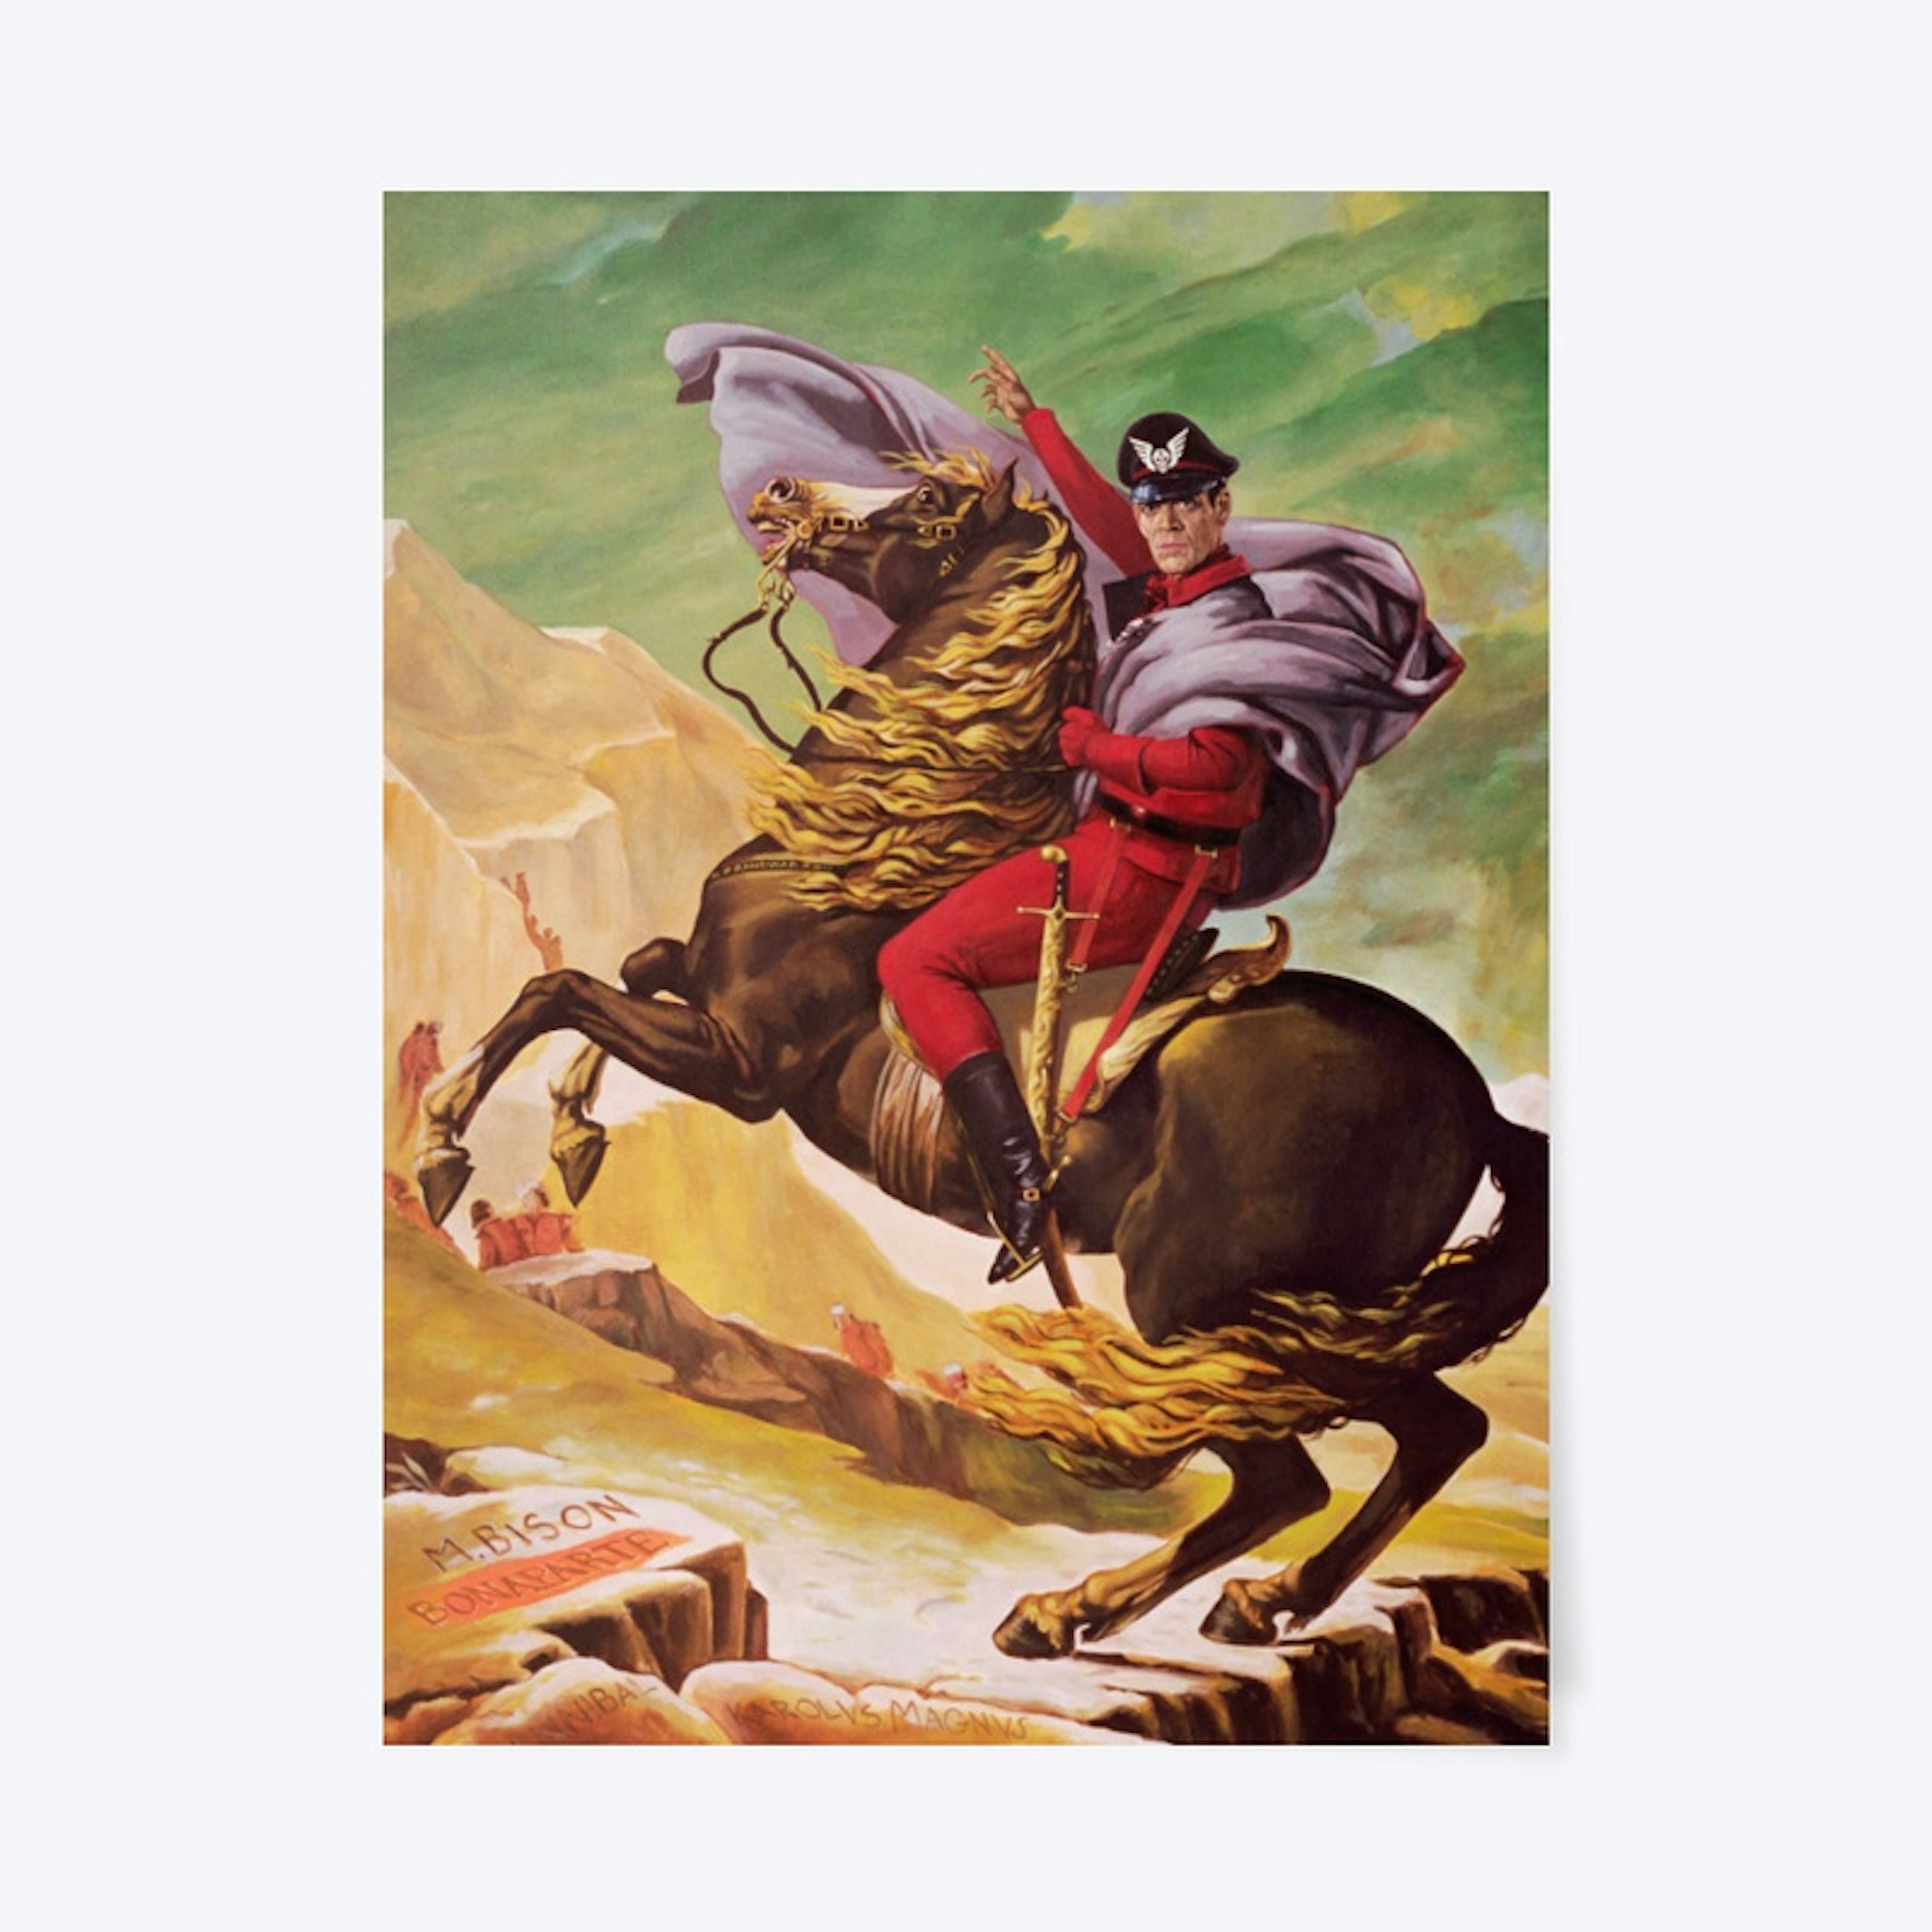 M Bison Crossing the Alps